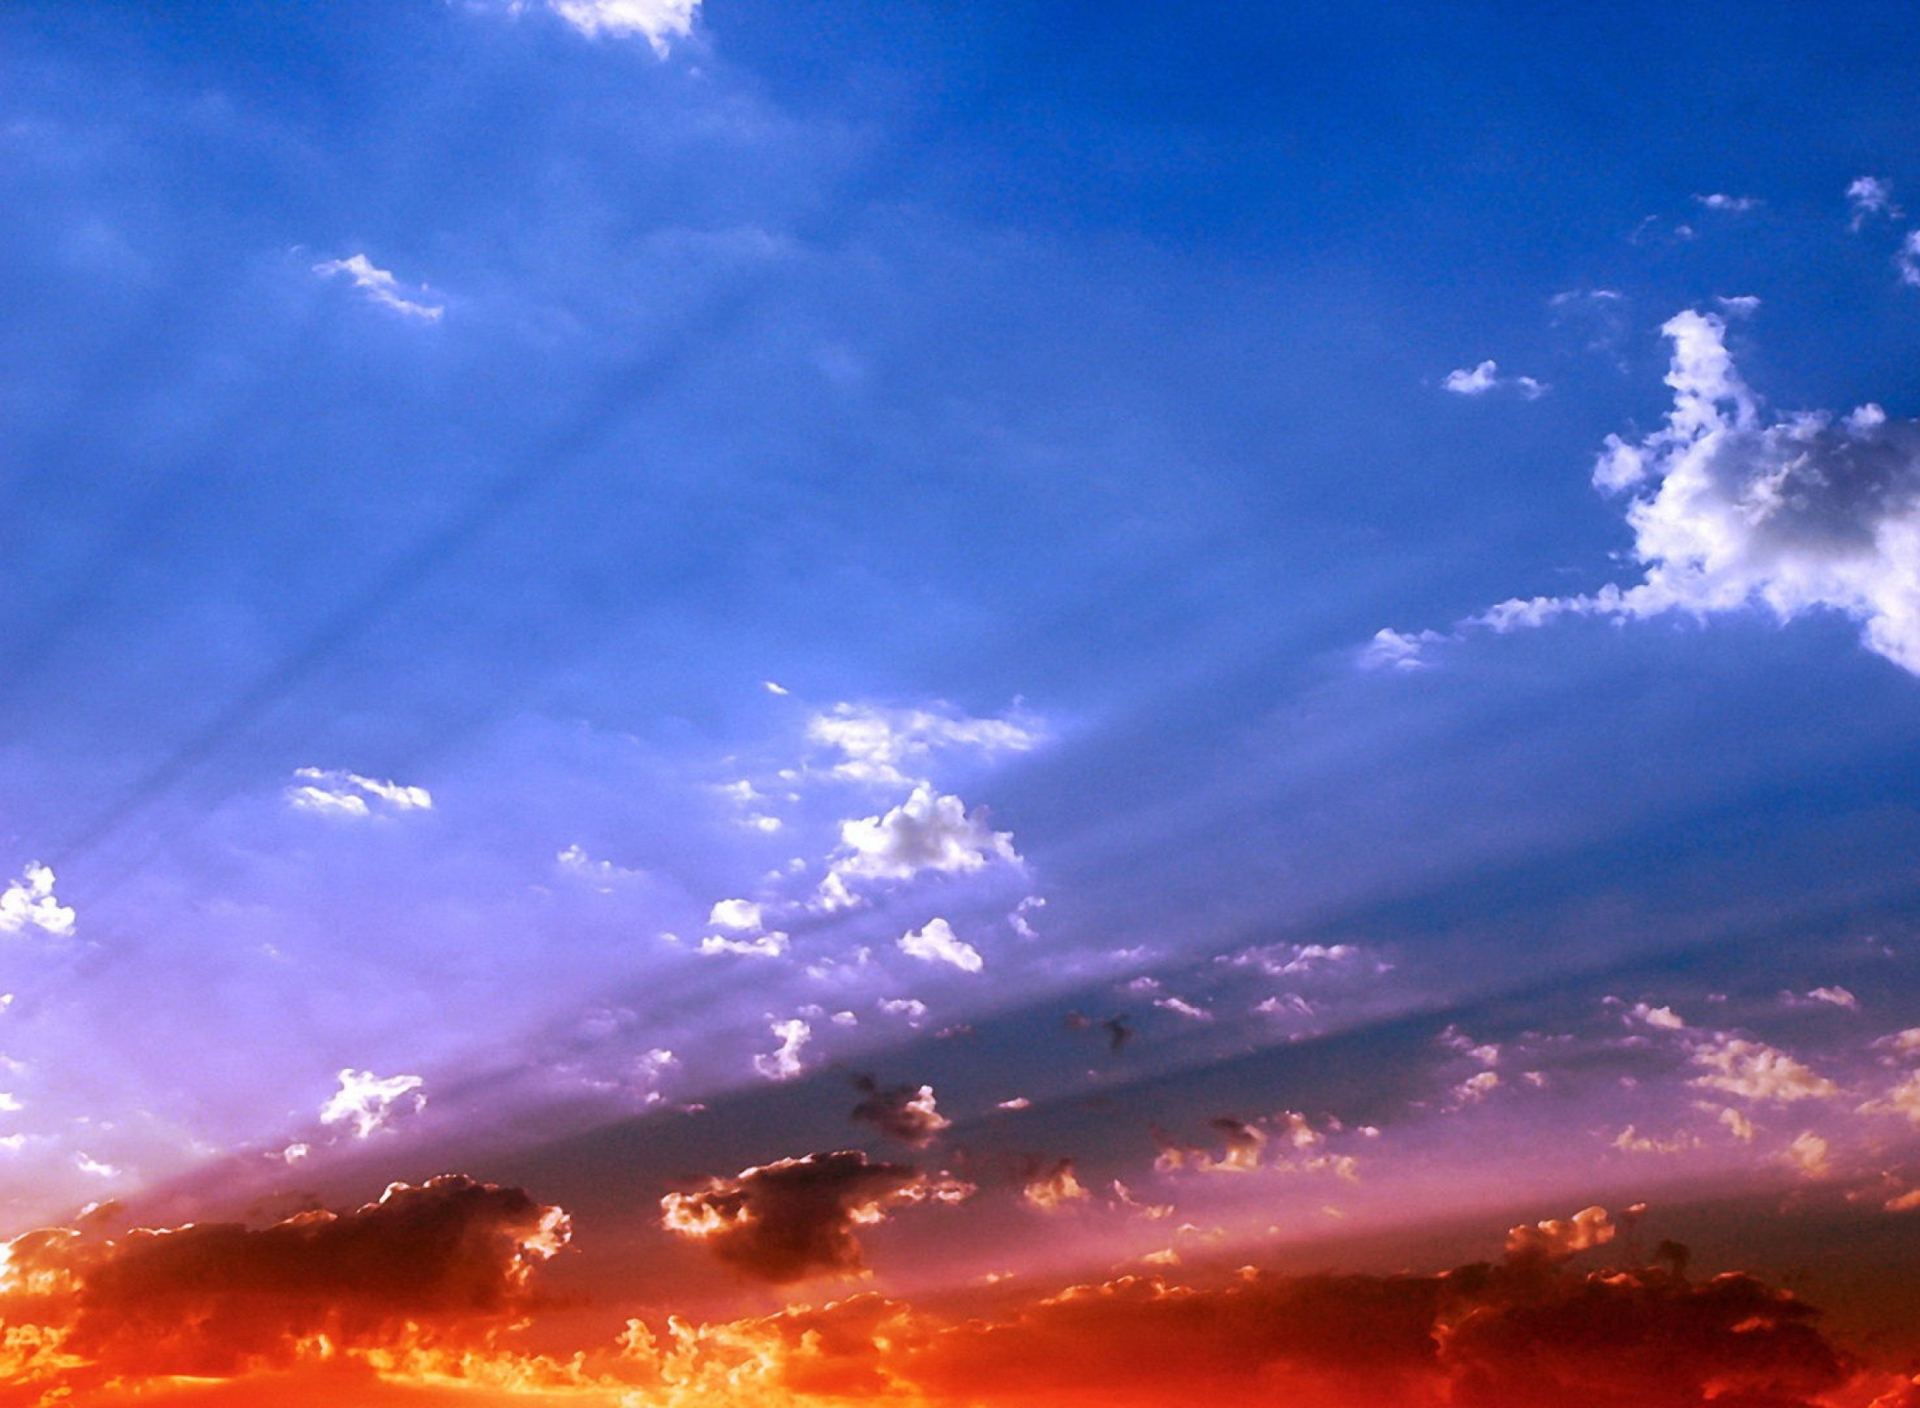 Blue Sky And Red Sunset wallpaper 1920x1408